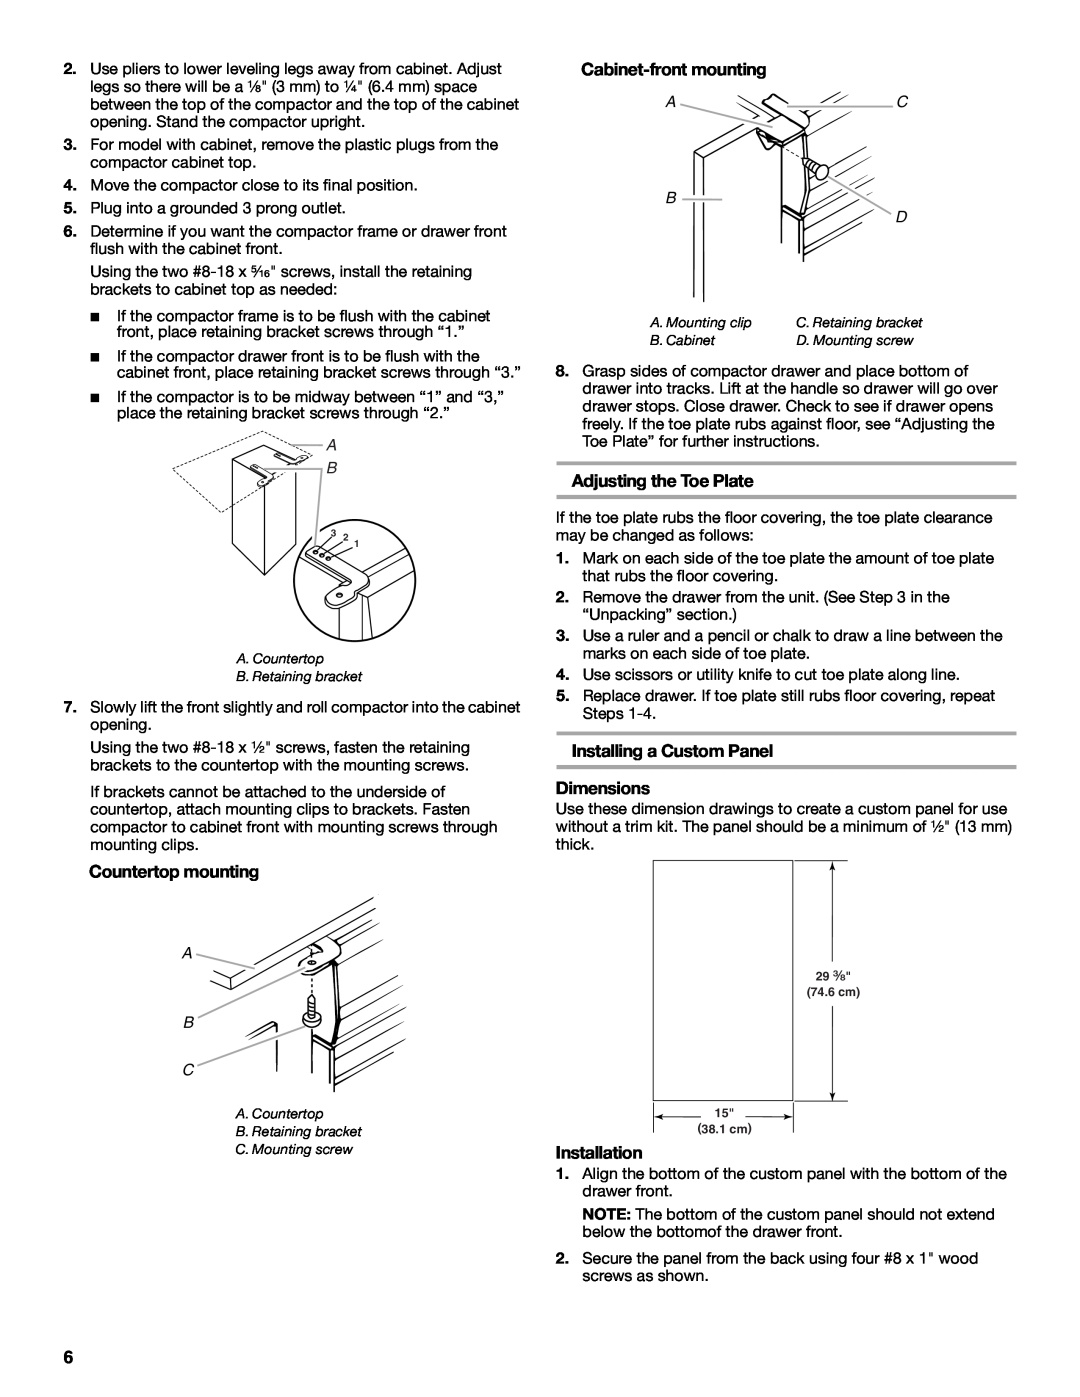 KitchenAid 9871915B manual Countertop mounting, Cabinet-front mounting, Adjusting the Toe Plate, Installation, A C B D 